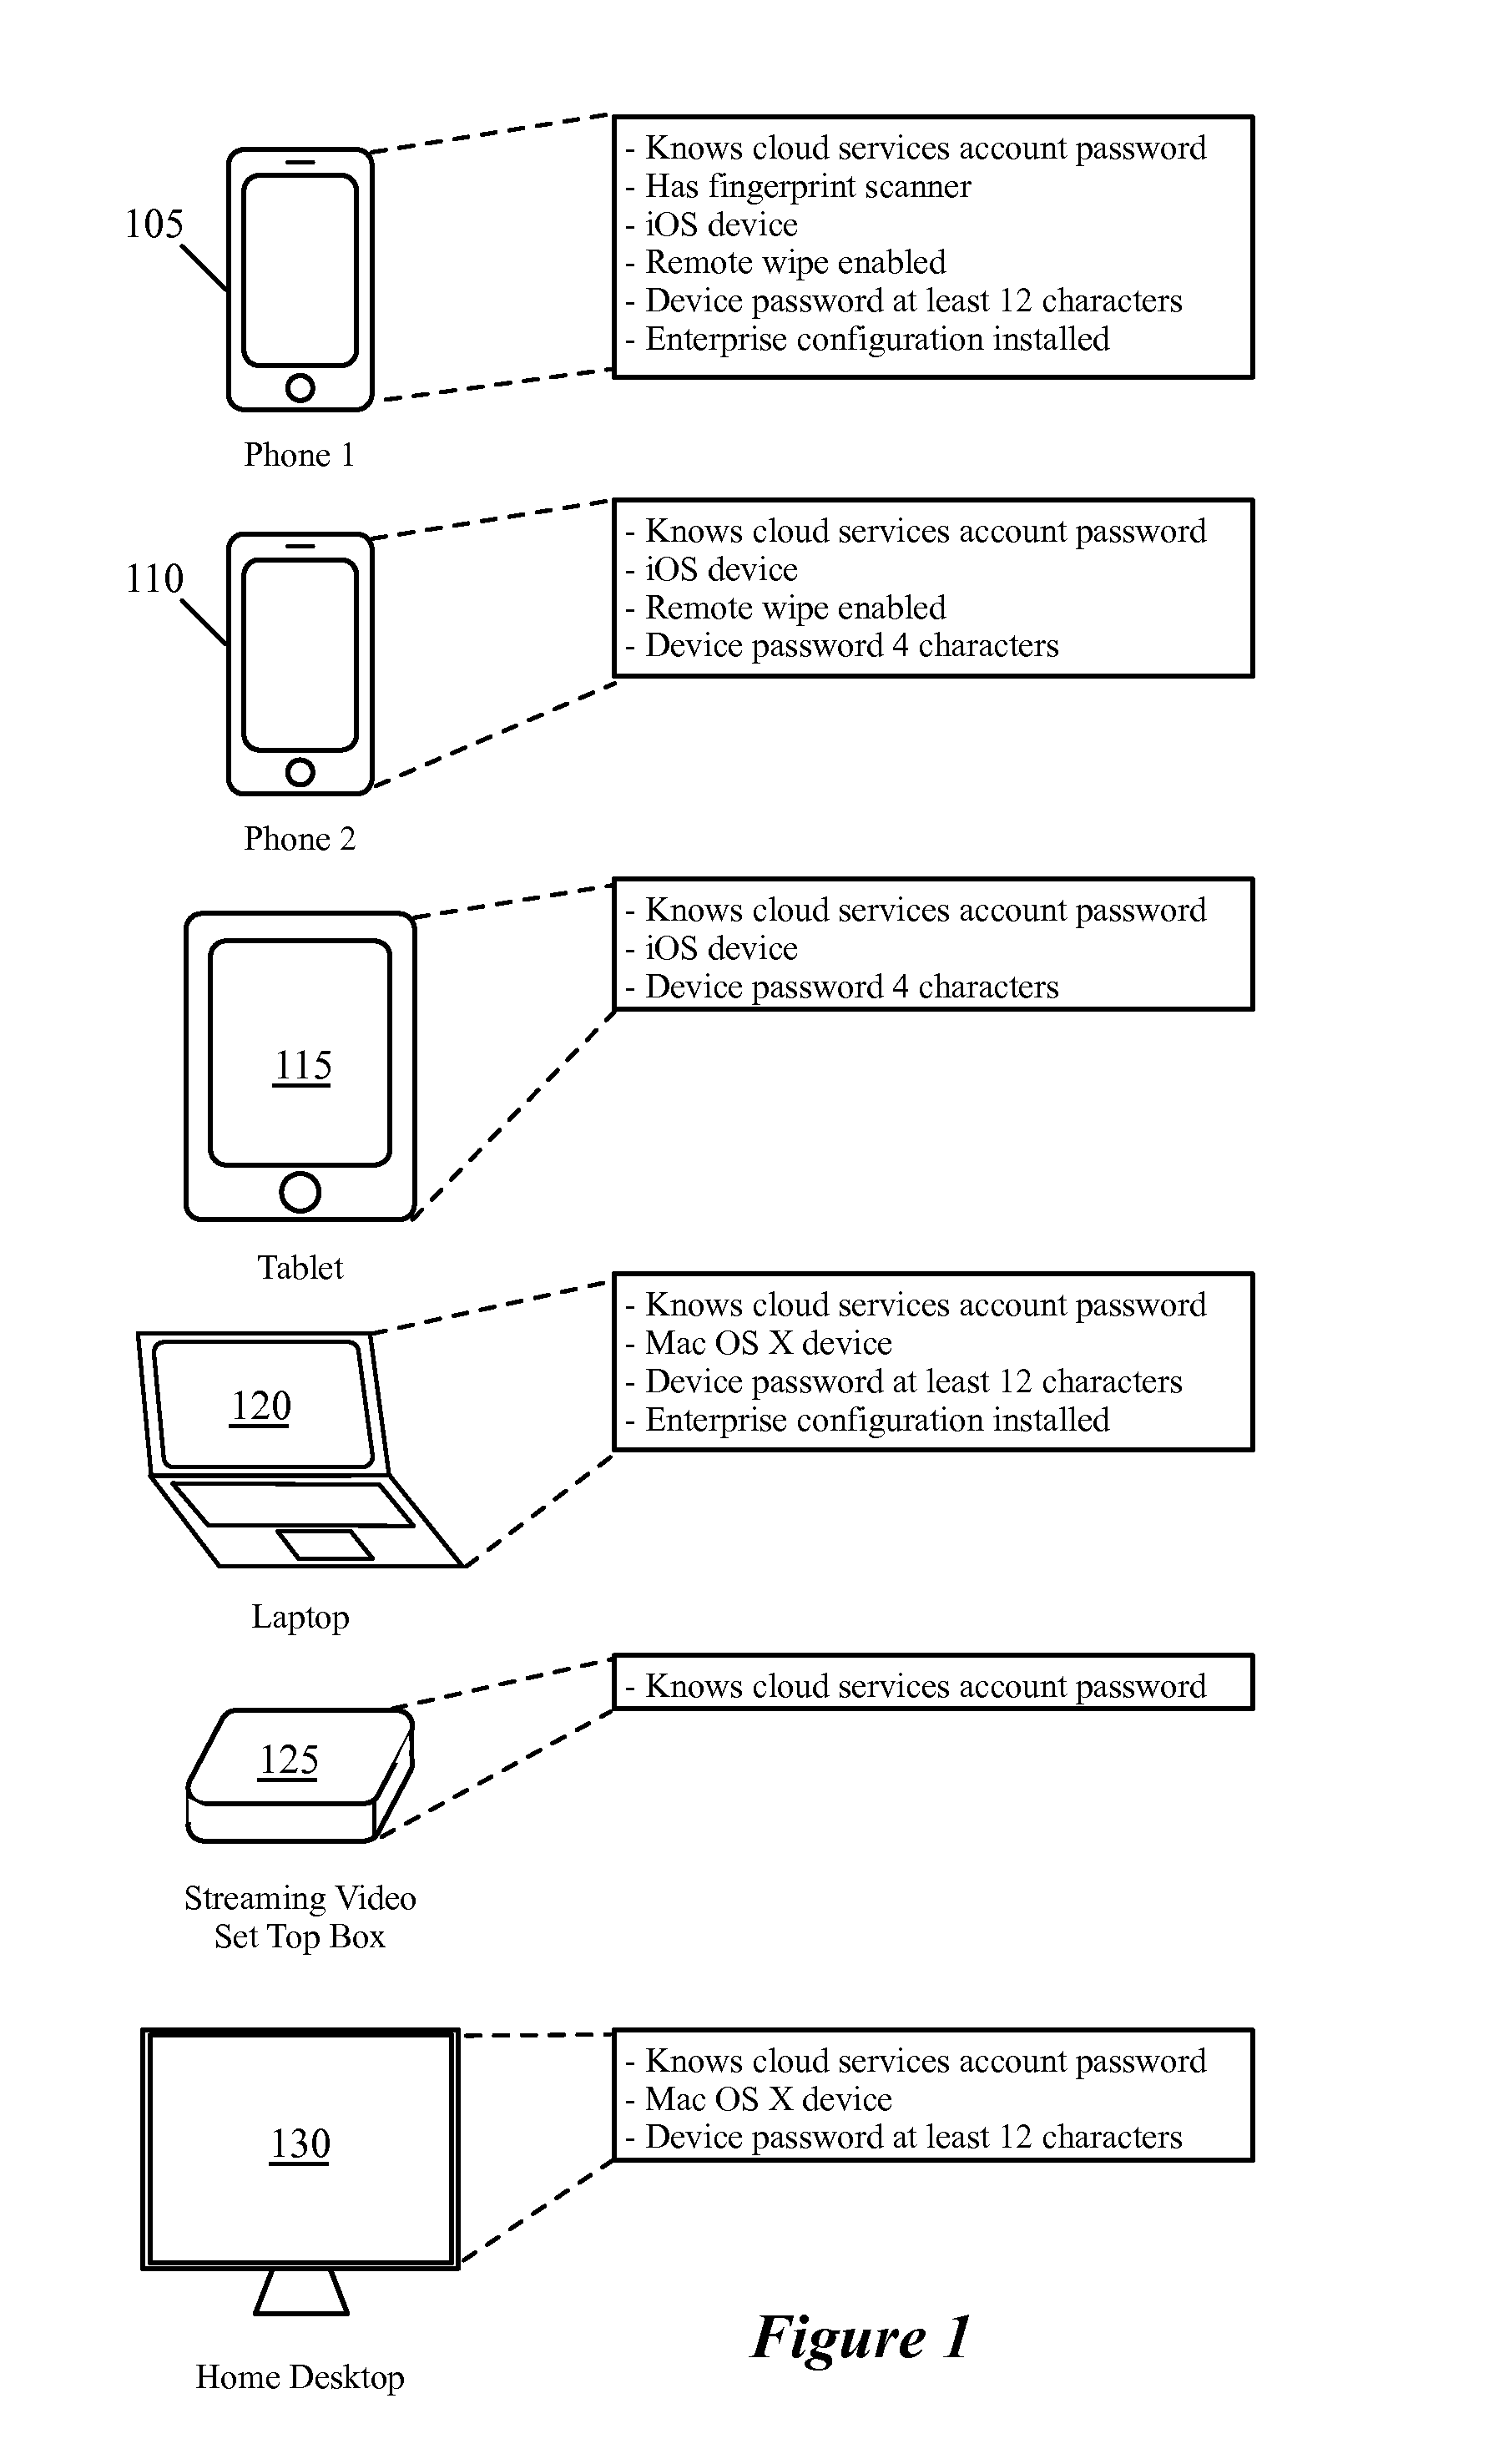 Dynamic Group Membership For Devices